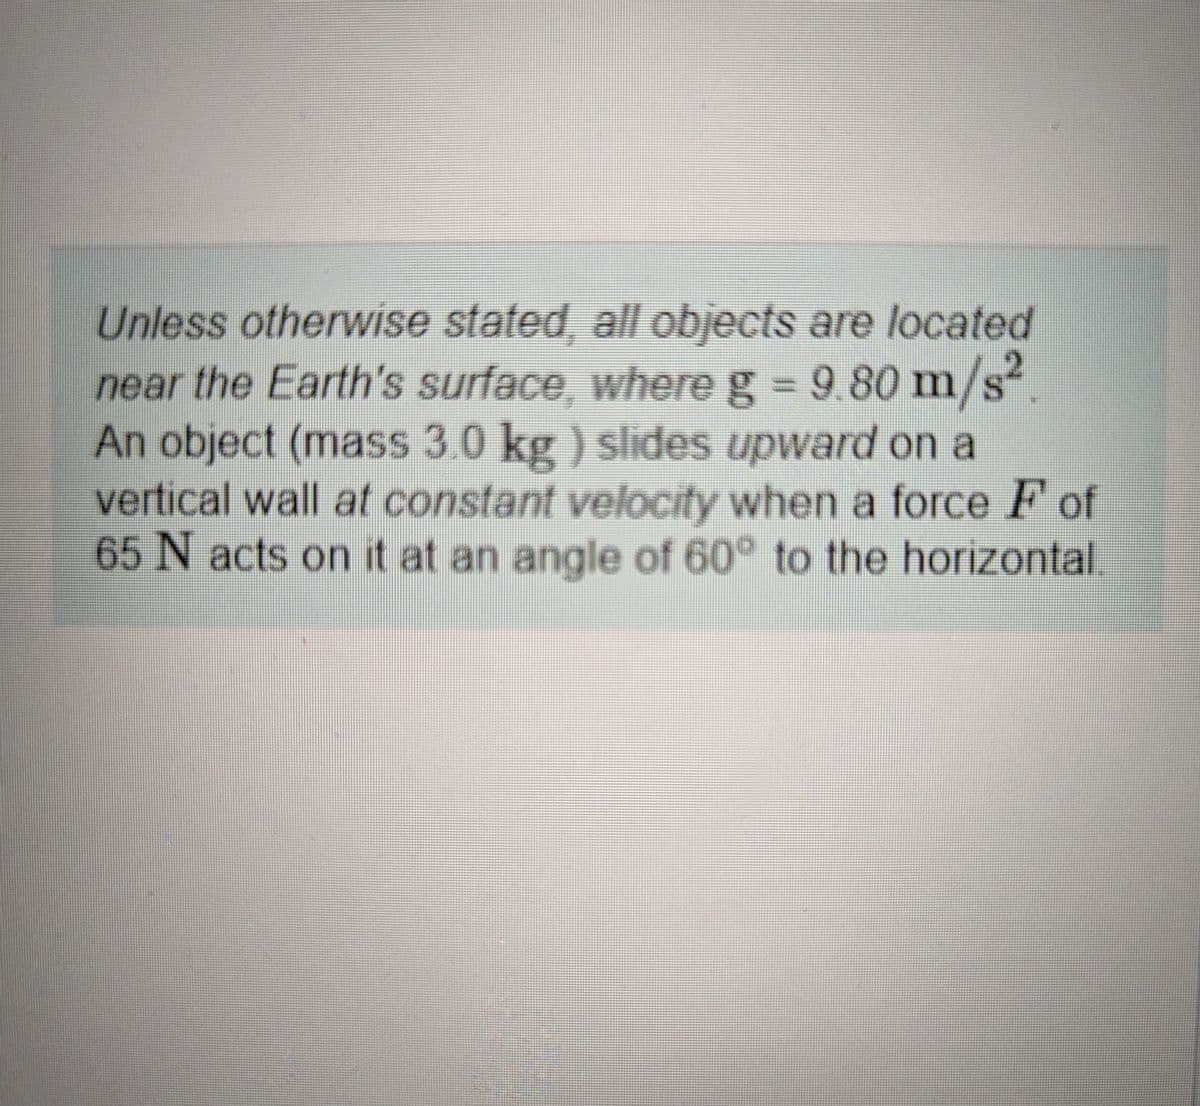 Unless otherwise stated, all objects are located
near the Earth's surface, where g = 9.80 m/s².
An object (mass 3.0 kg) slides upward on a
vertical wall at constant velocity when a force F of
65 N acts on it at an angle of 60° to the horizontal.